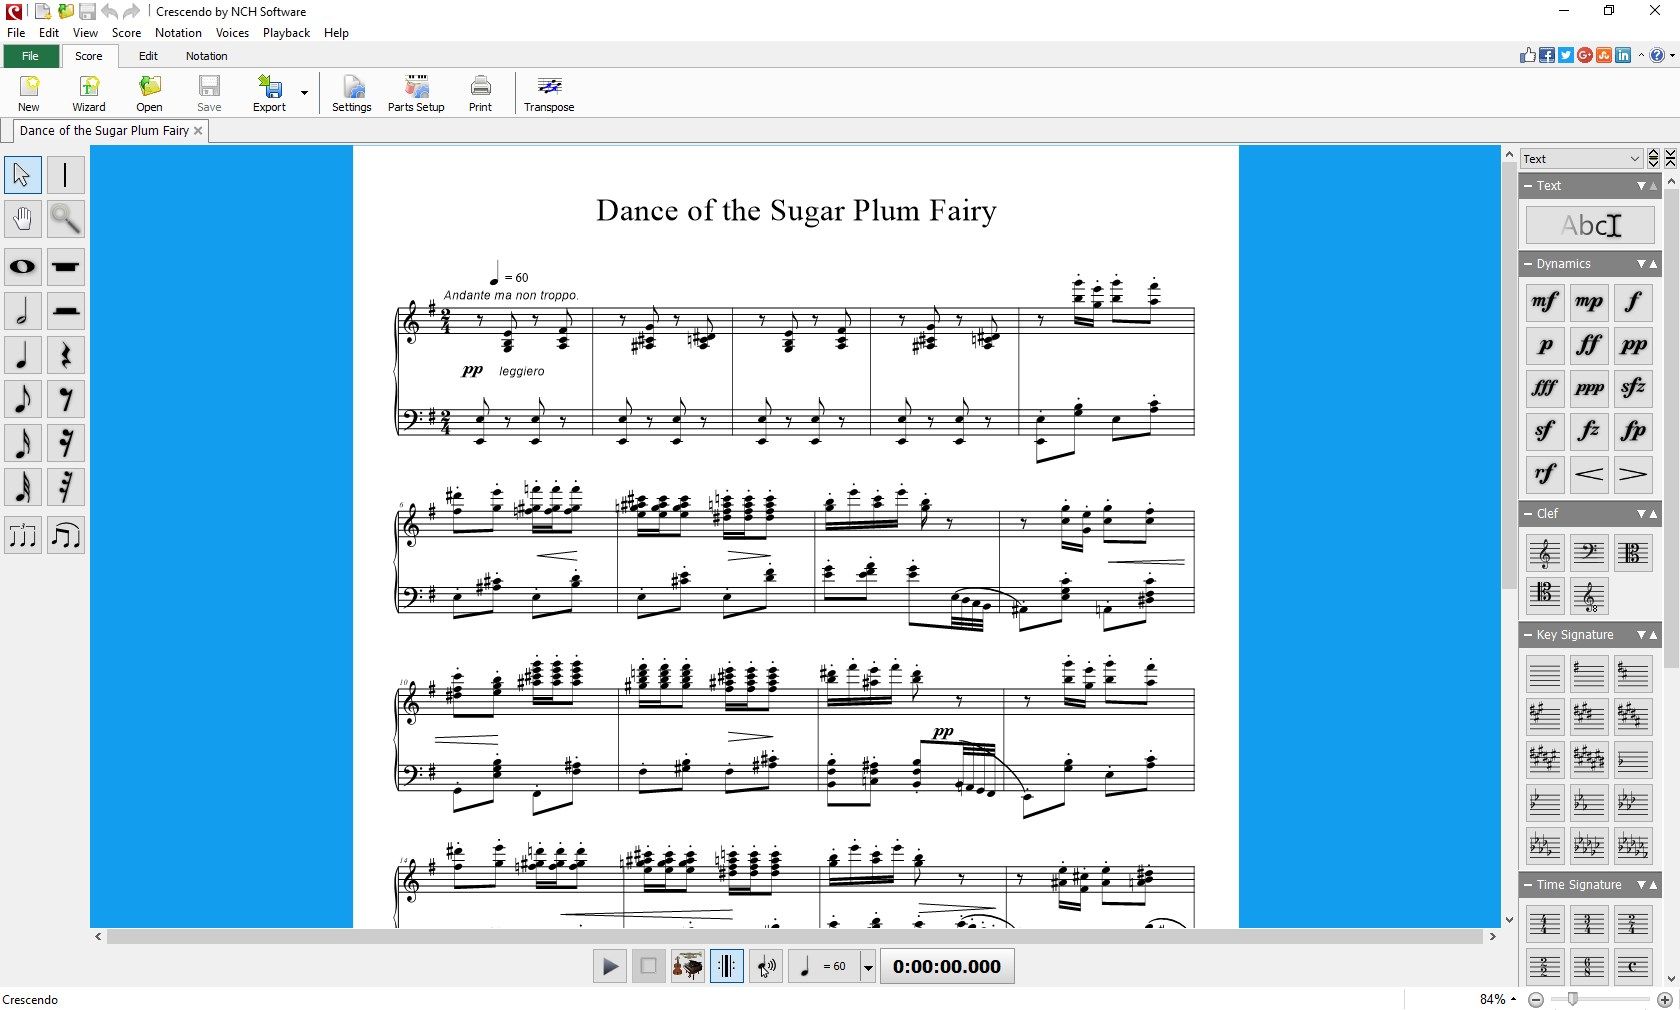 Complete and easy to read sheet music notation